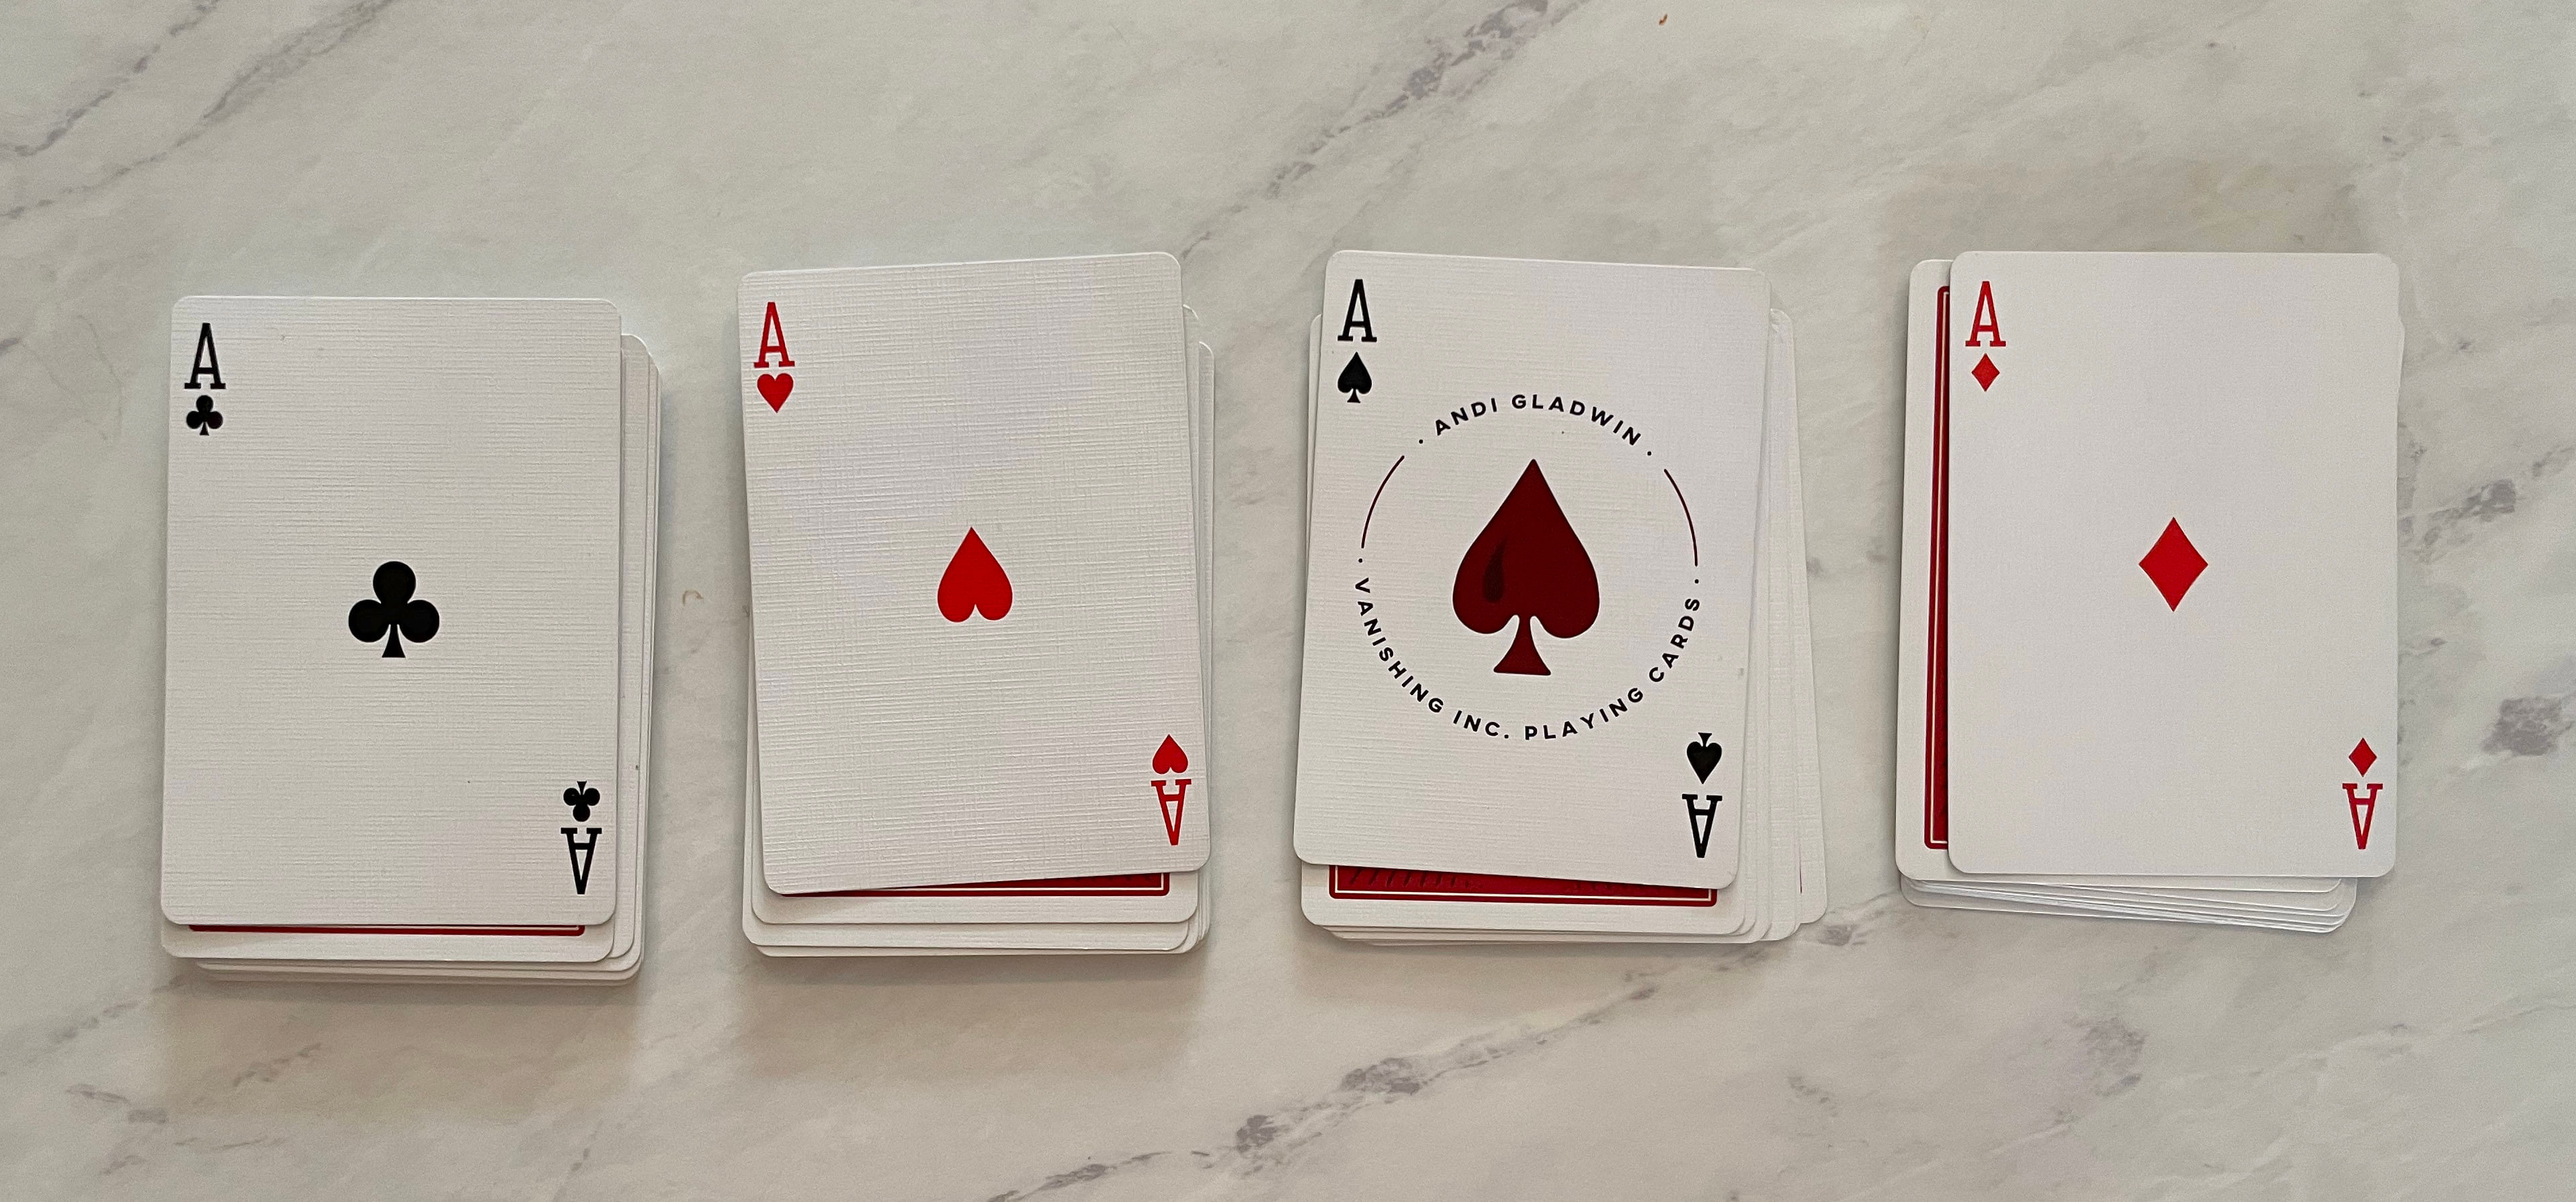 four aces on top of a deck of cards